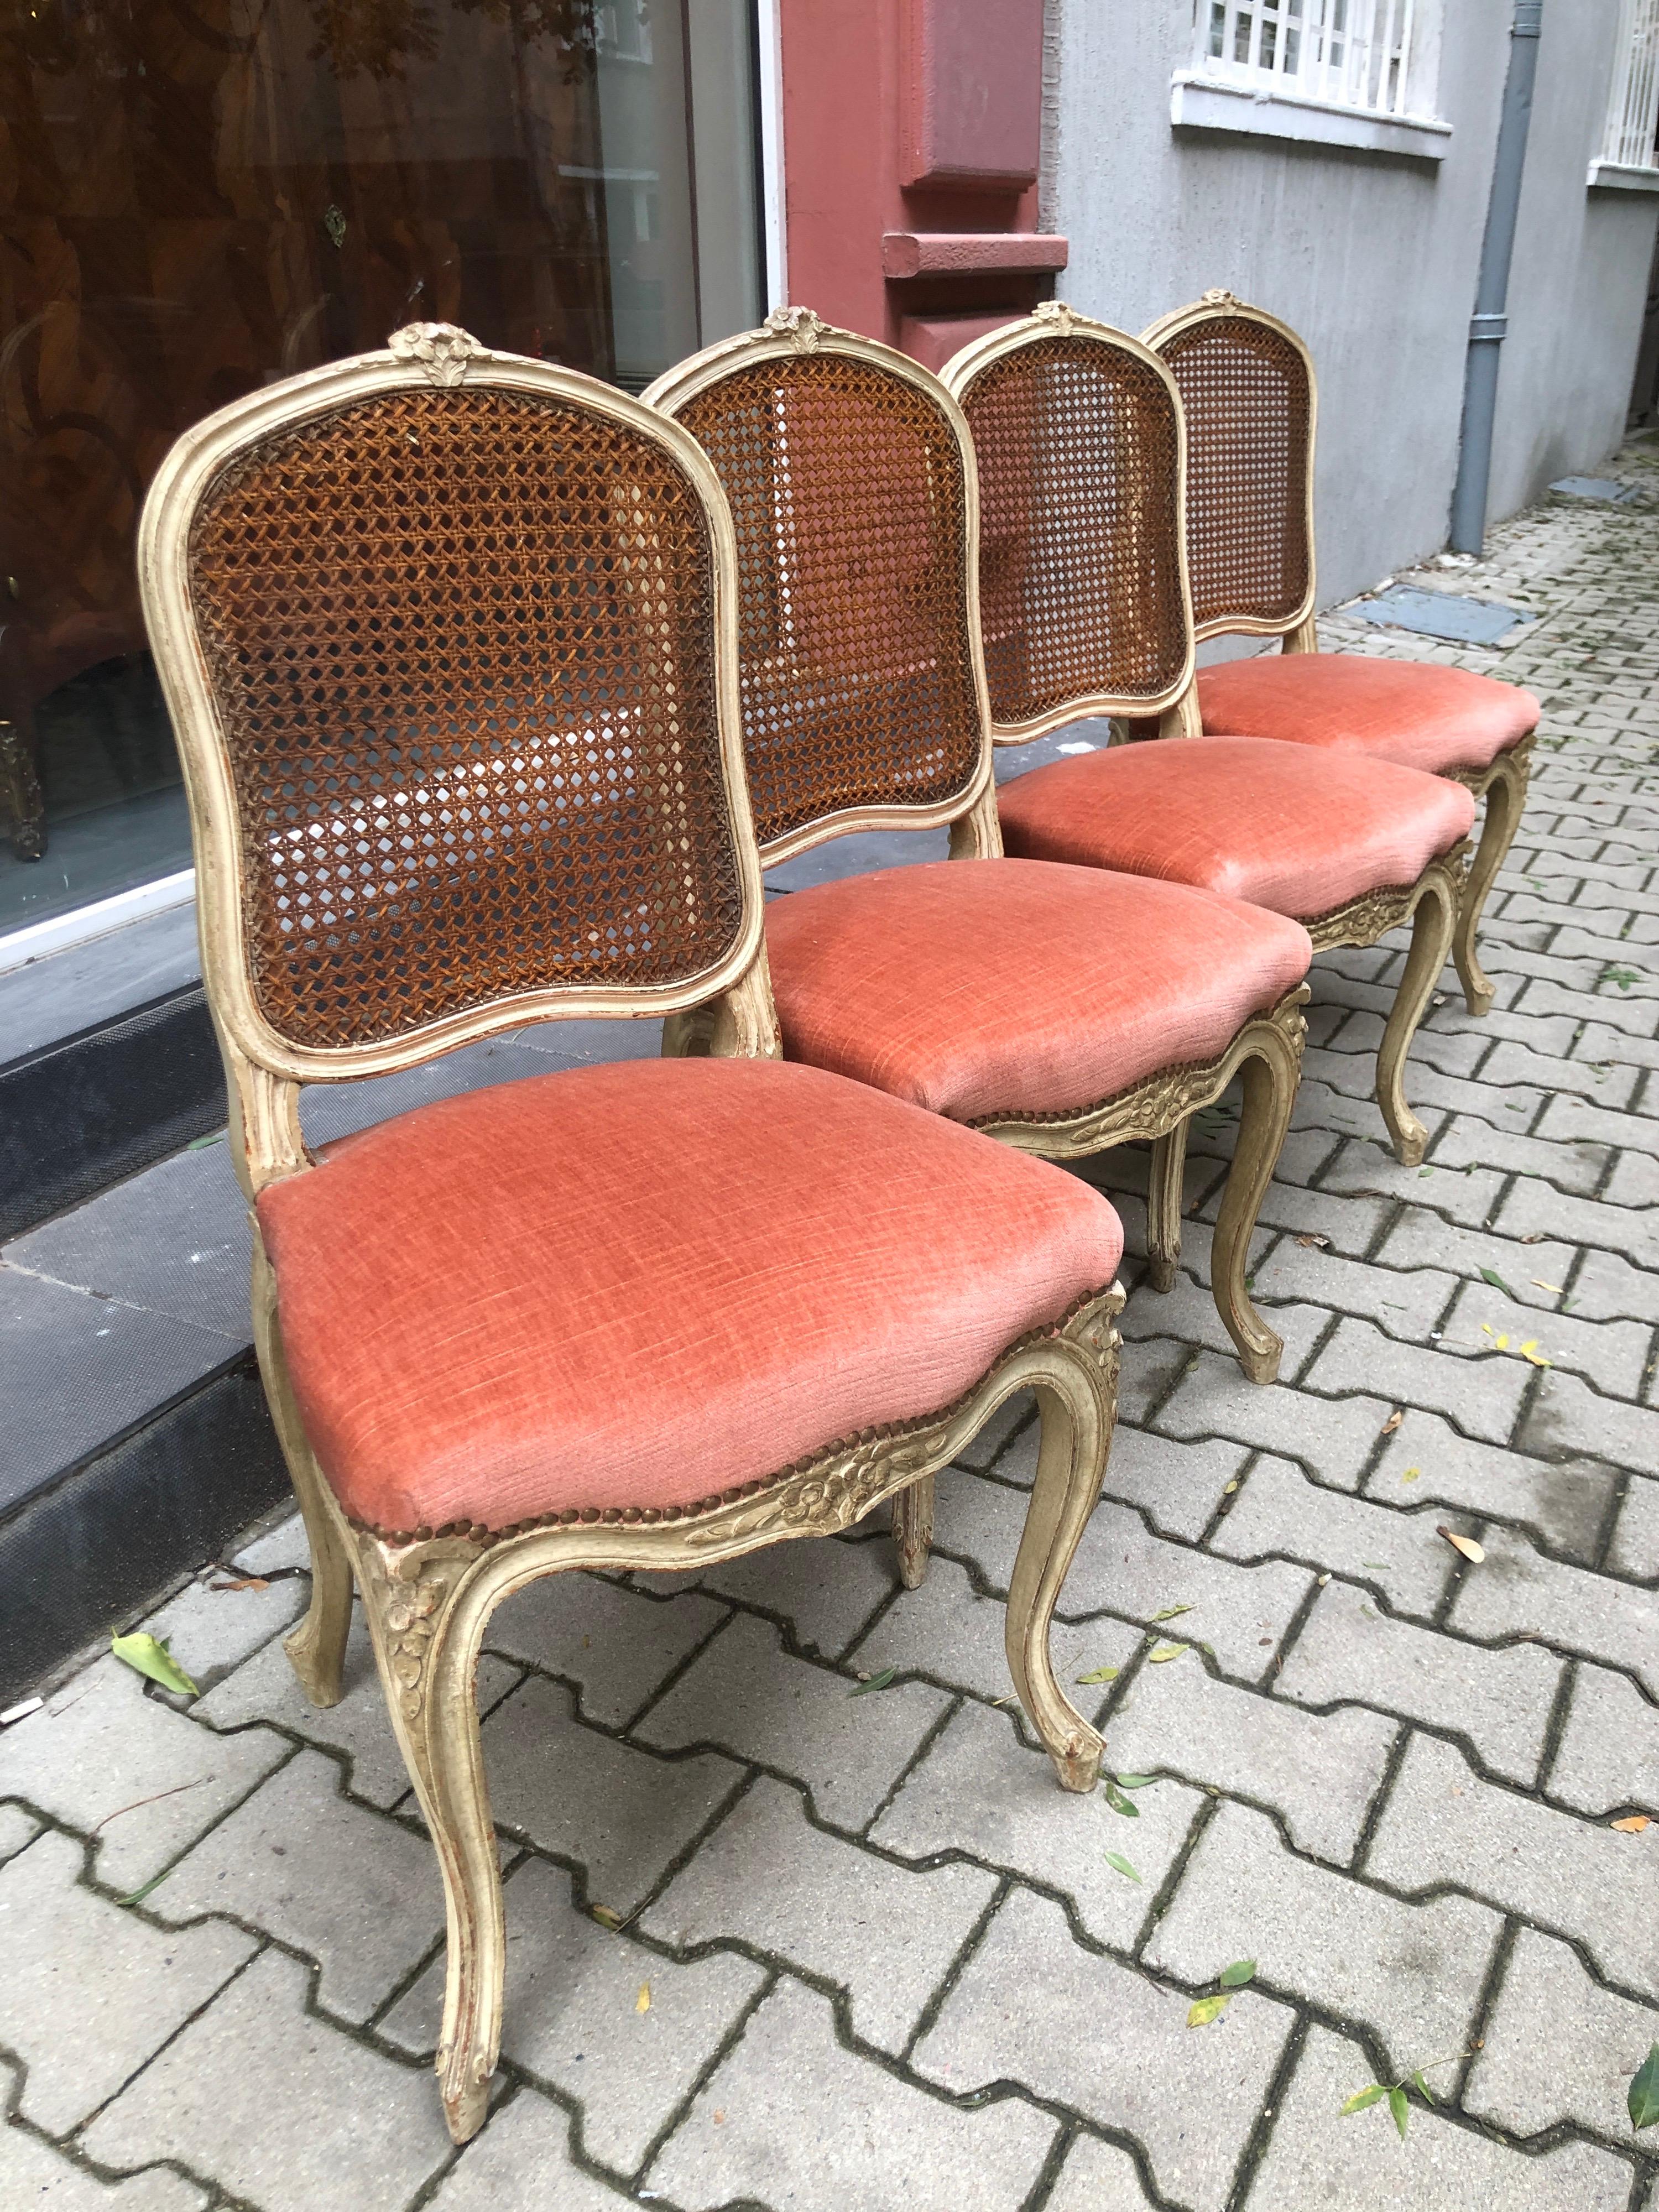 These dining chairs are made of hand carved and hand painted wood in light beige and have a very typical floral decoration in Louis XV style. They are very stable and comfortable especially with the cane backs. The seats are upholstered in coral